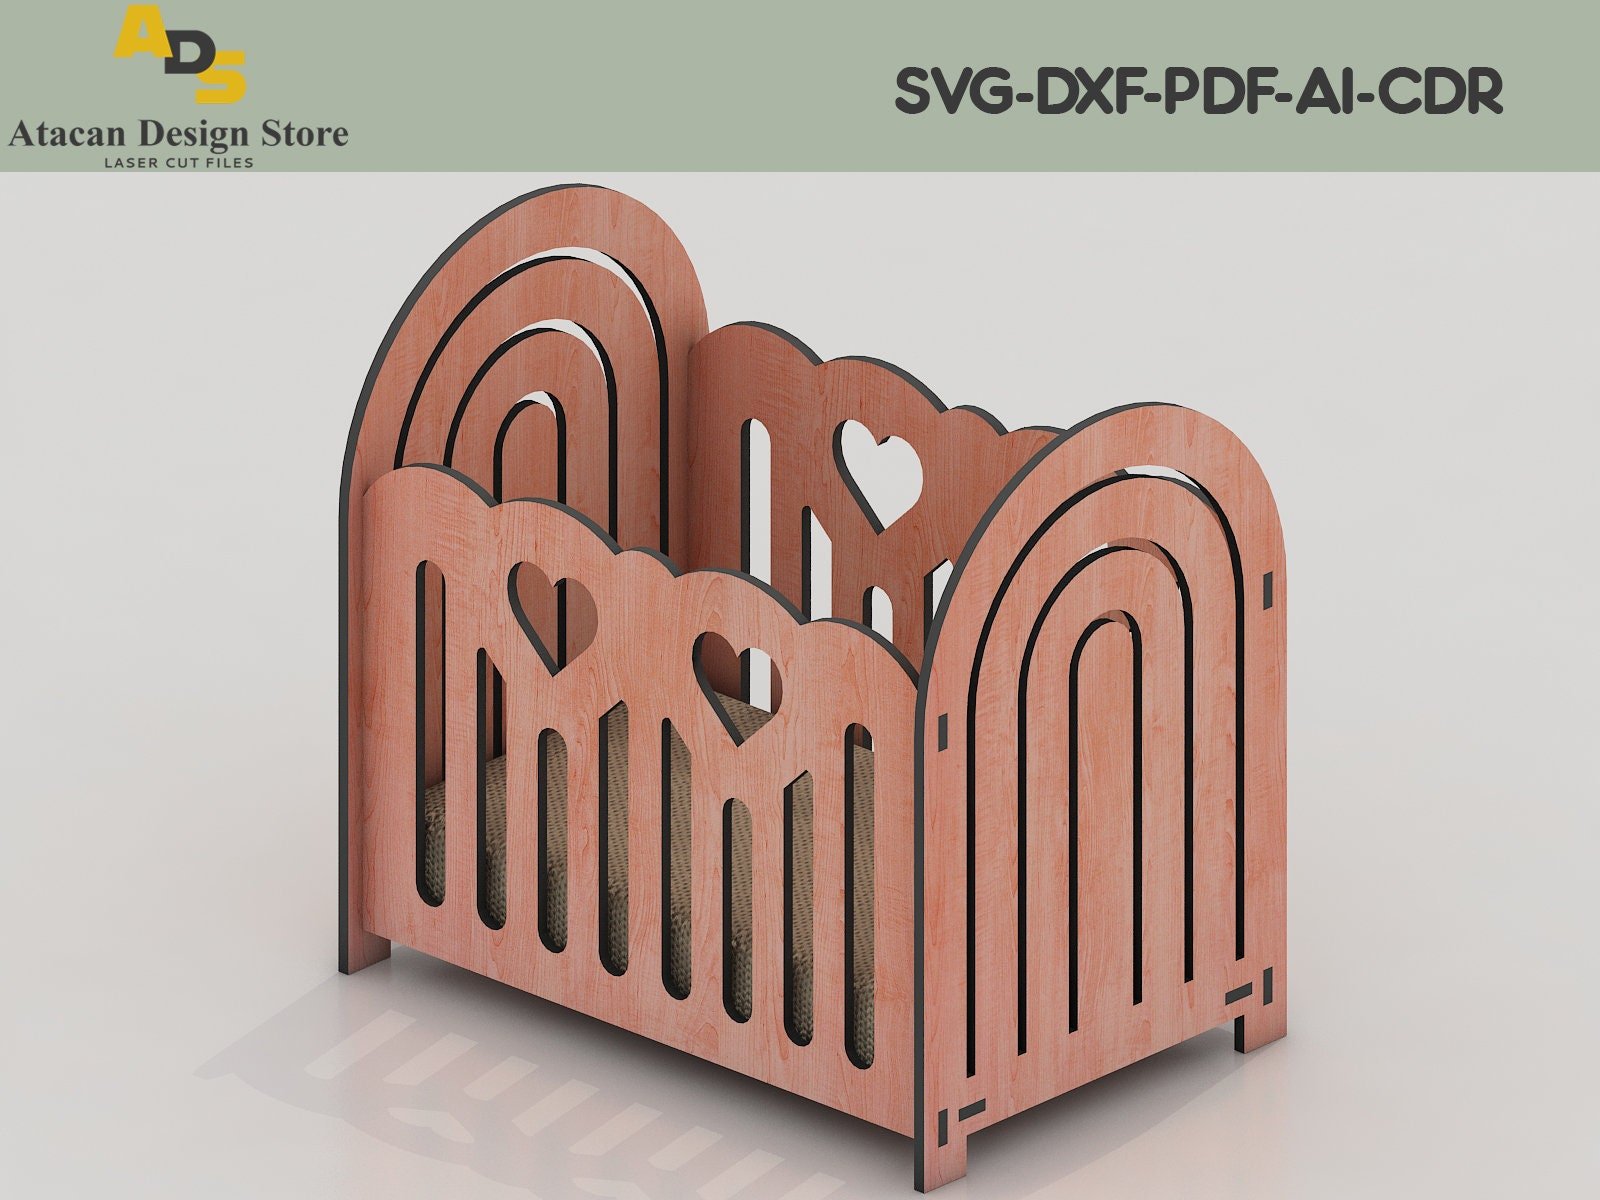 Baby cradle laser cut SVG files for glowforge / Baby Crib Svg, Dxf laser cnc templates / Digital vector download ADS102